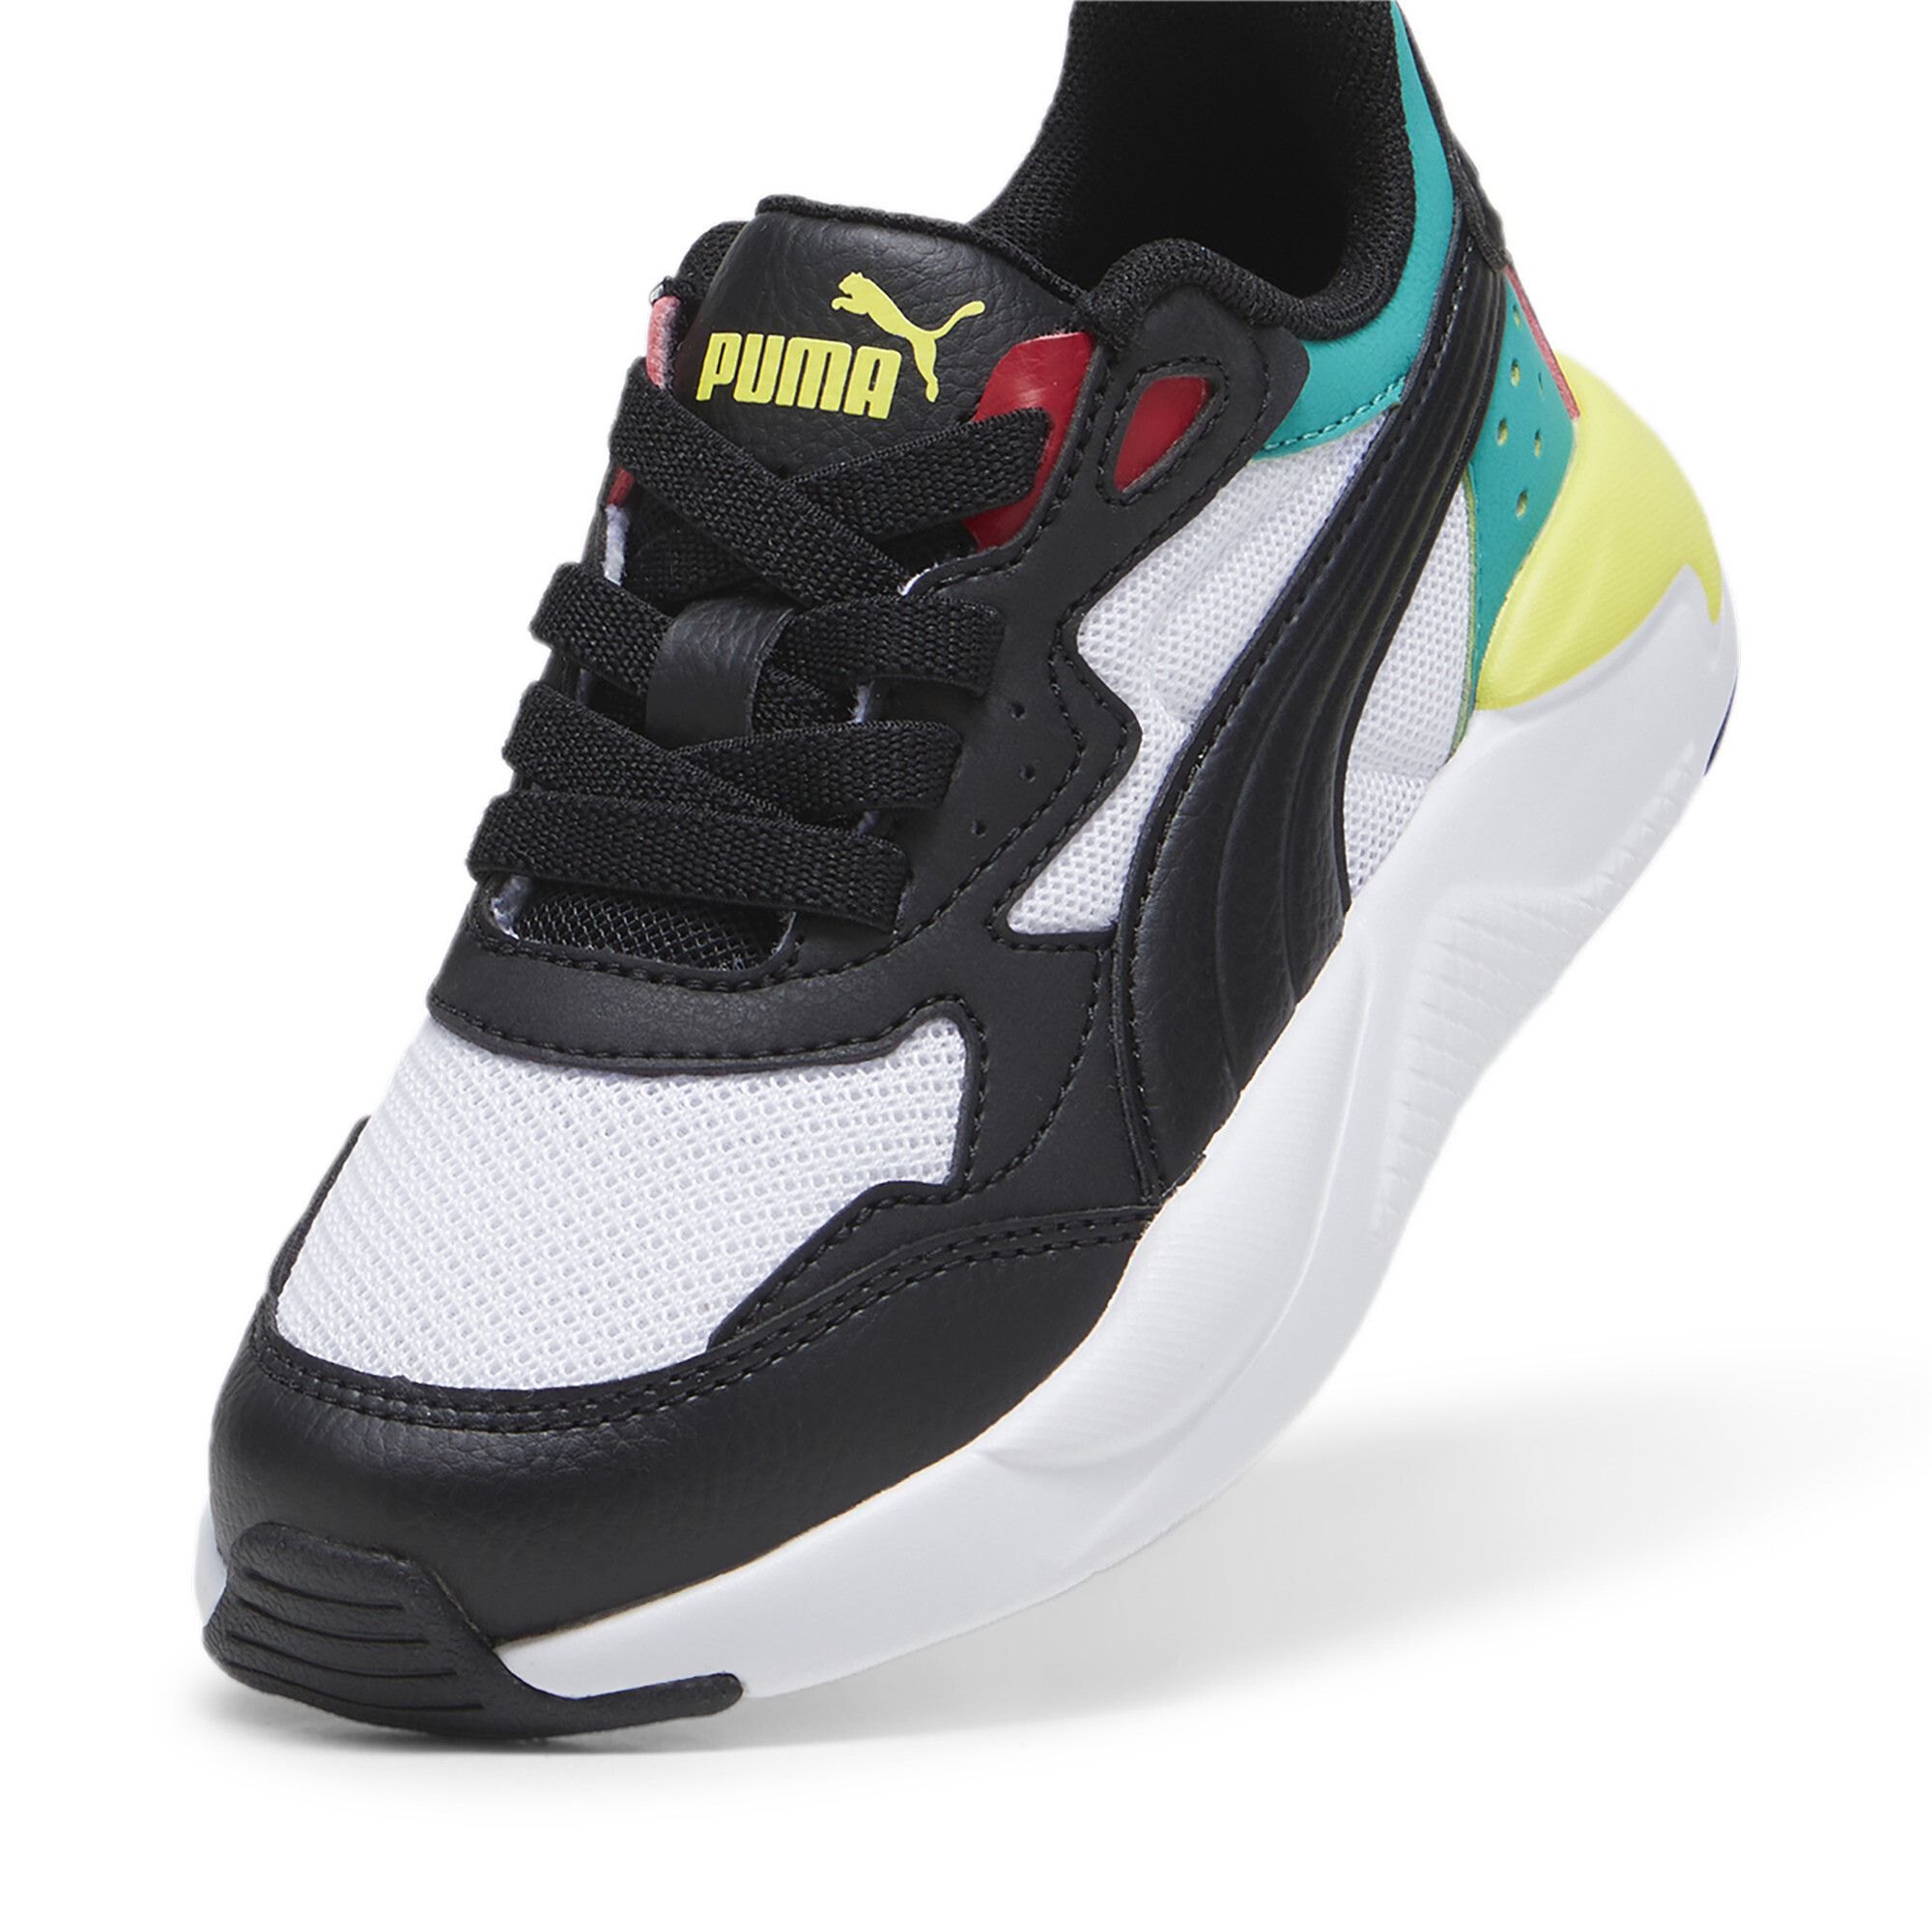 Puma X-Ray Speed AC Kids' Trainers, White, Size 28.5, Shoes